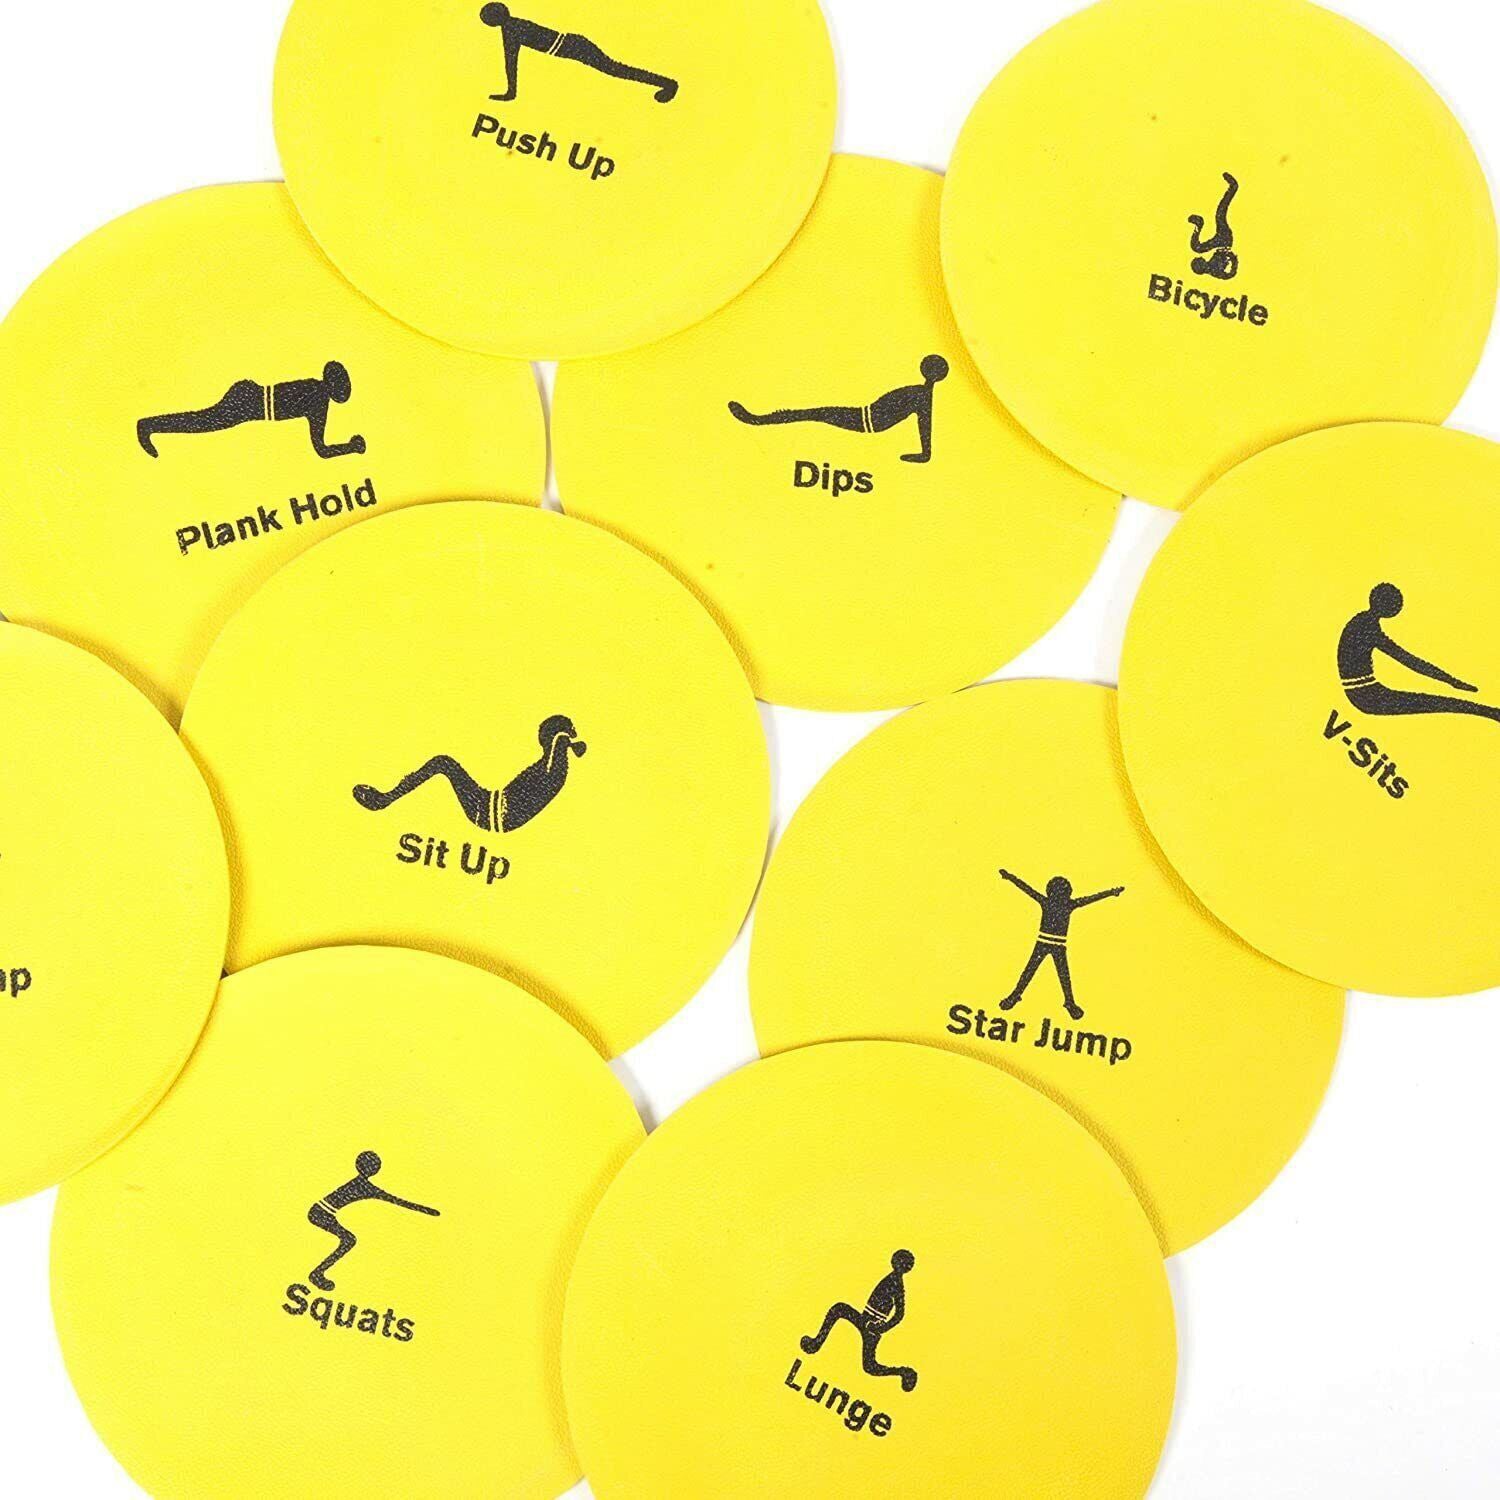 Exercise Sliders UK - 2X Dual Sided Gliding Discs Exercise Sliders -  Maskura - Get Trendy, Get Fit